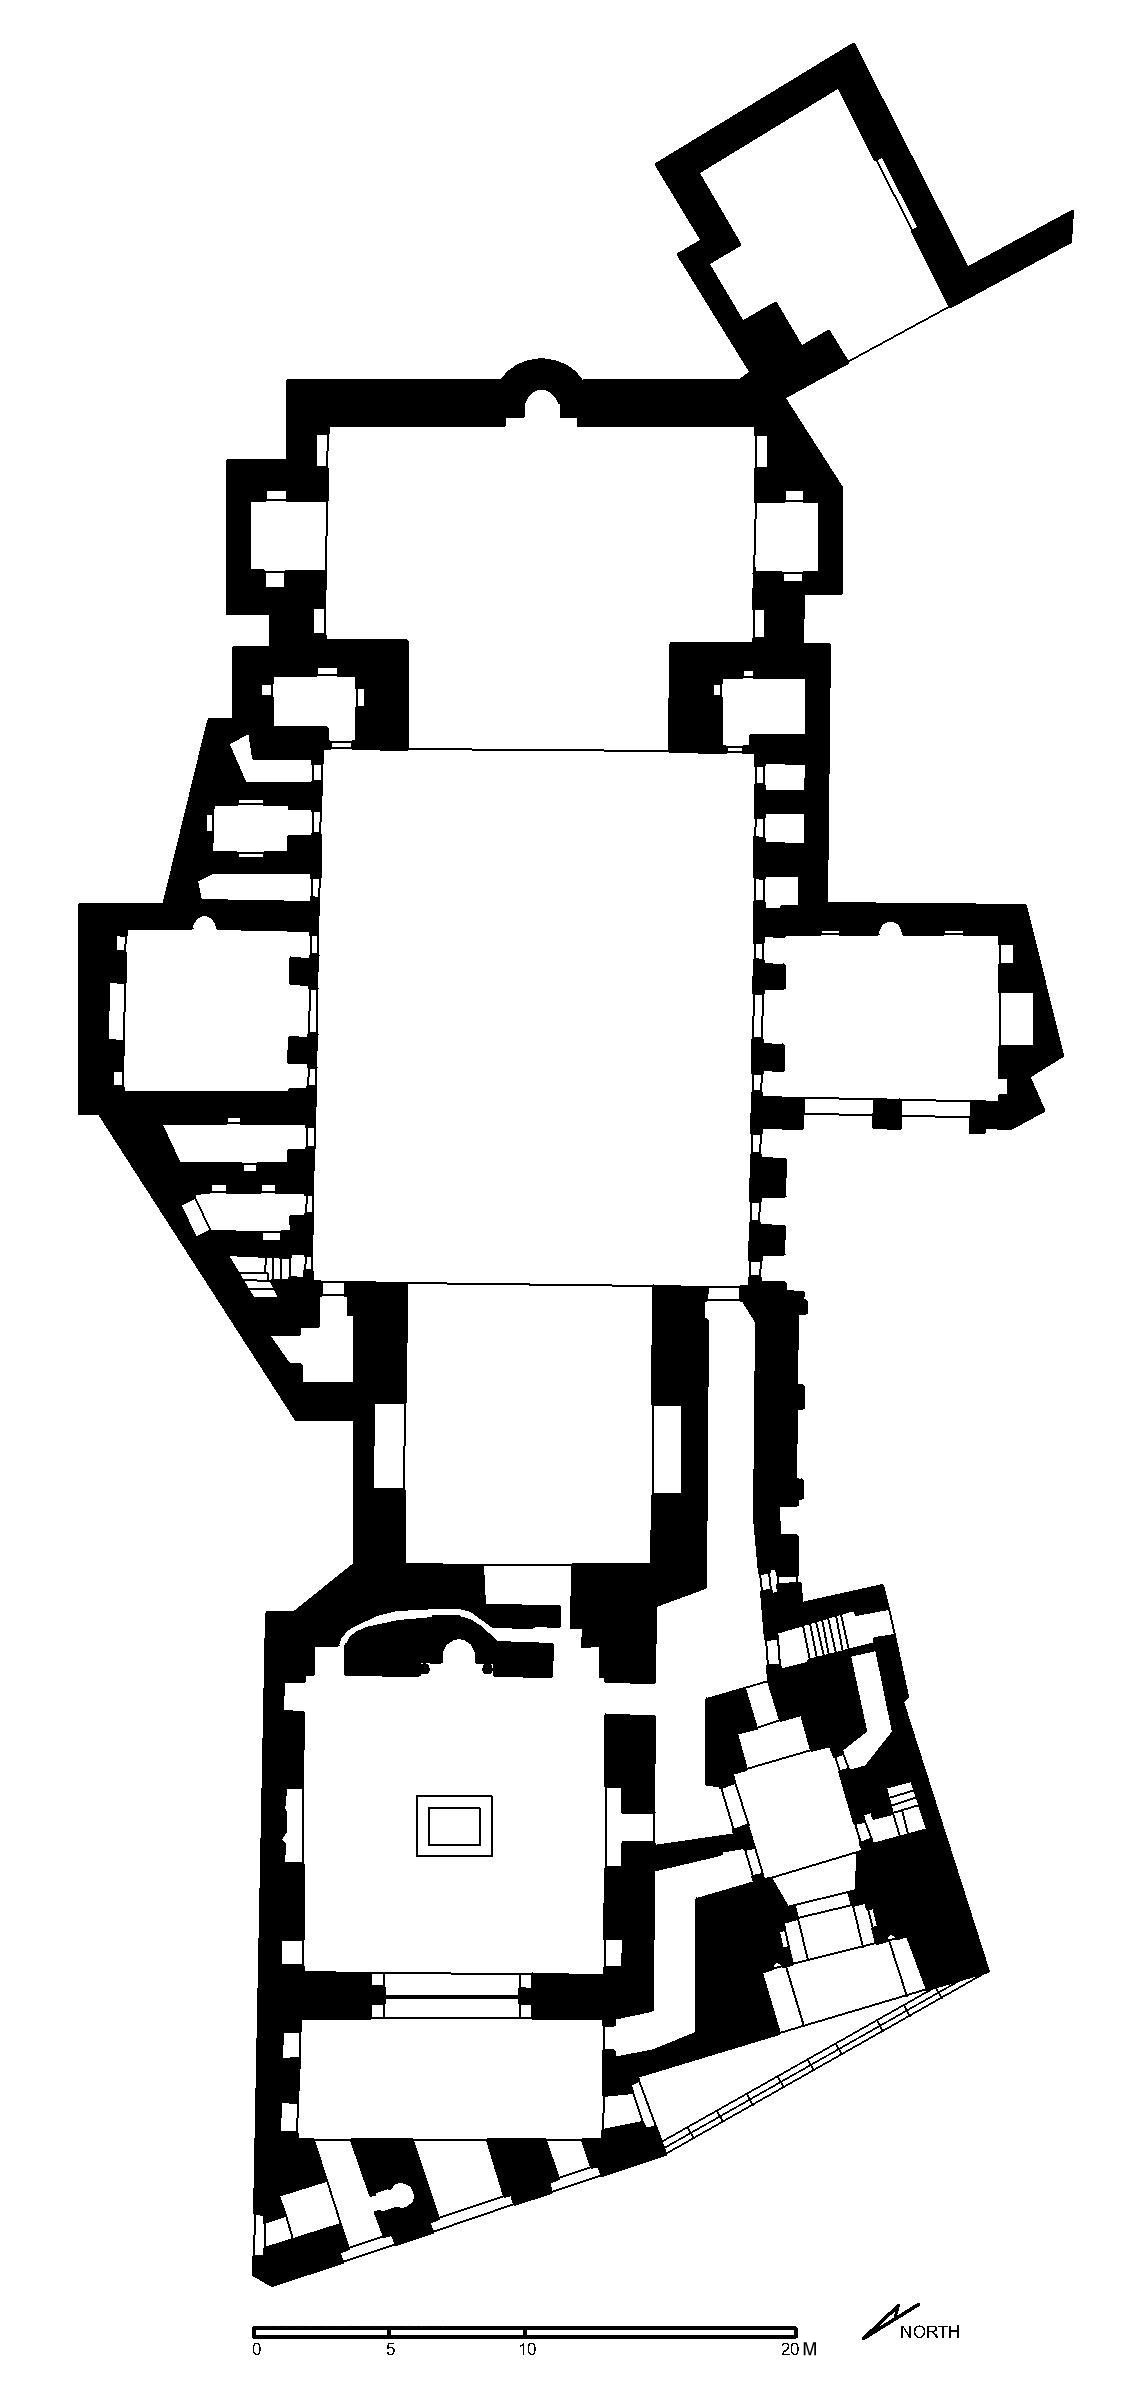 Funerary Complex of Baybars al-Jashankir - Floor plan of khanqah complex (after Meinecke) in AutoCAD 2000 format. Click the download button to download a zipped file containing the .dwg file.